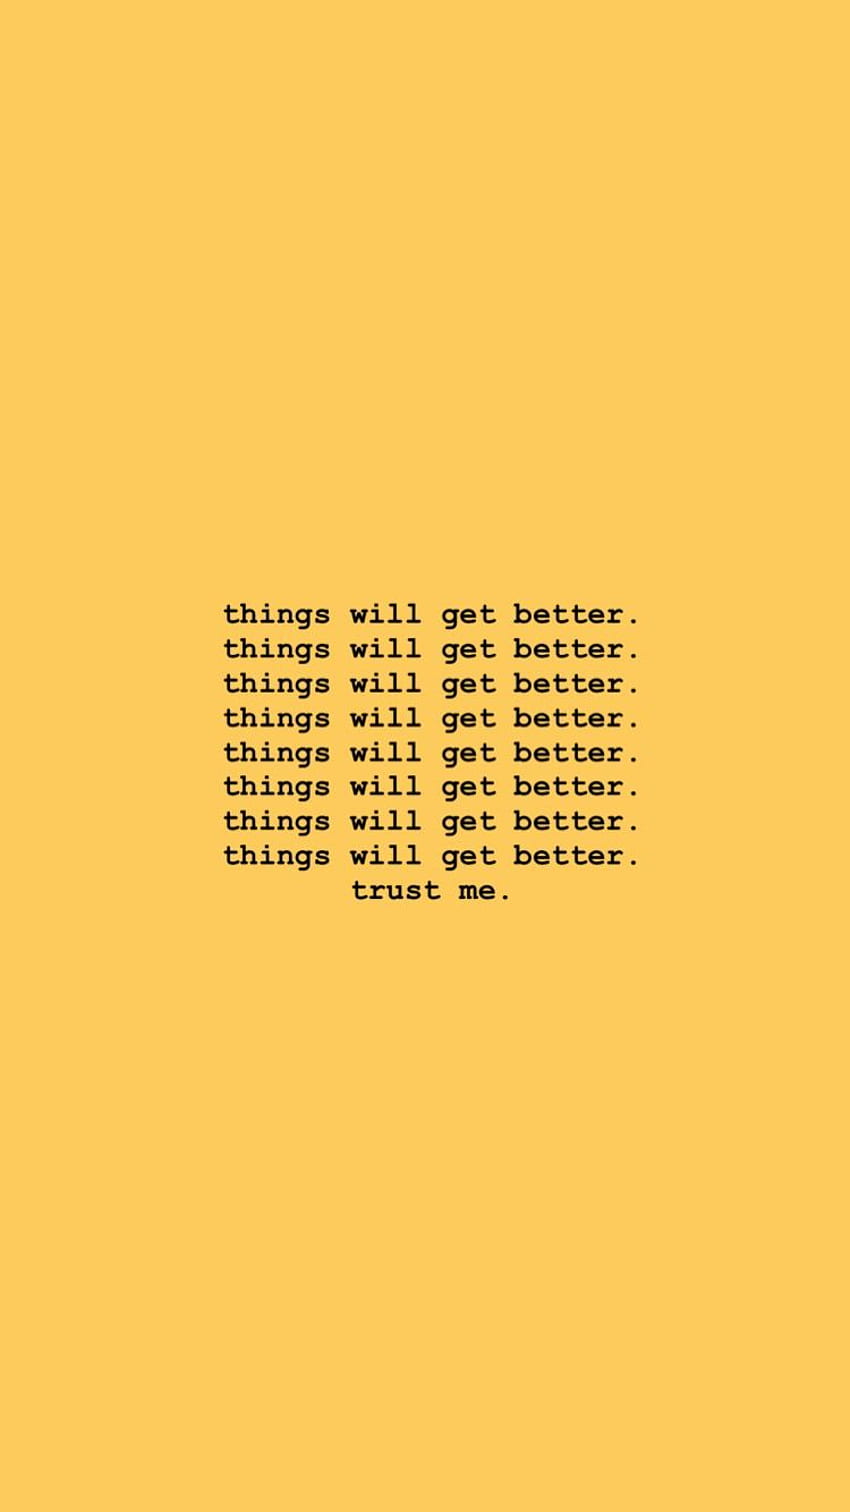 things will get better. trust me. Yellow quotes, quotes, Inspirational quotes HD phone wallpaper